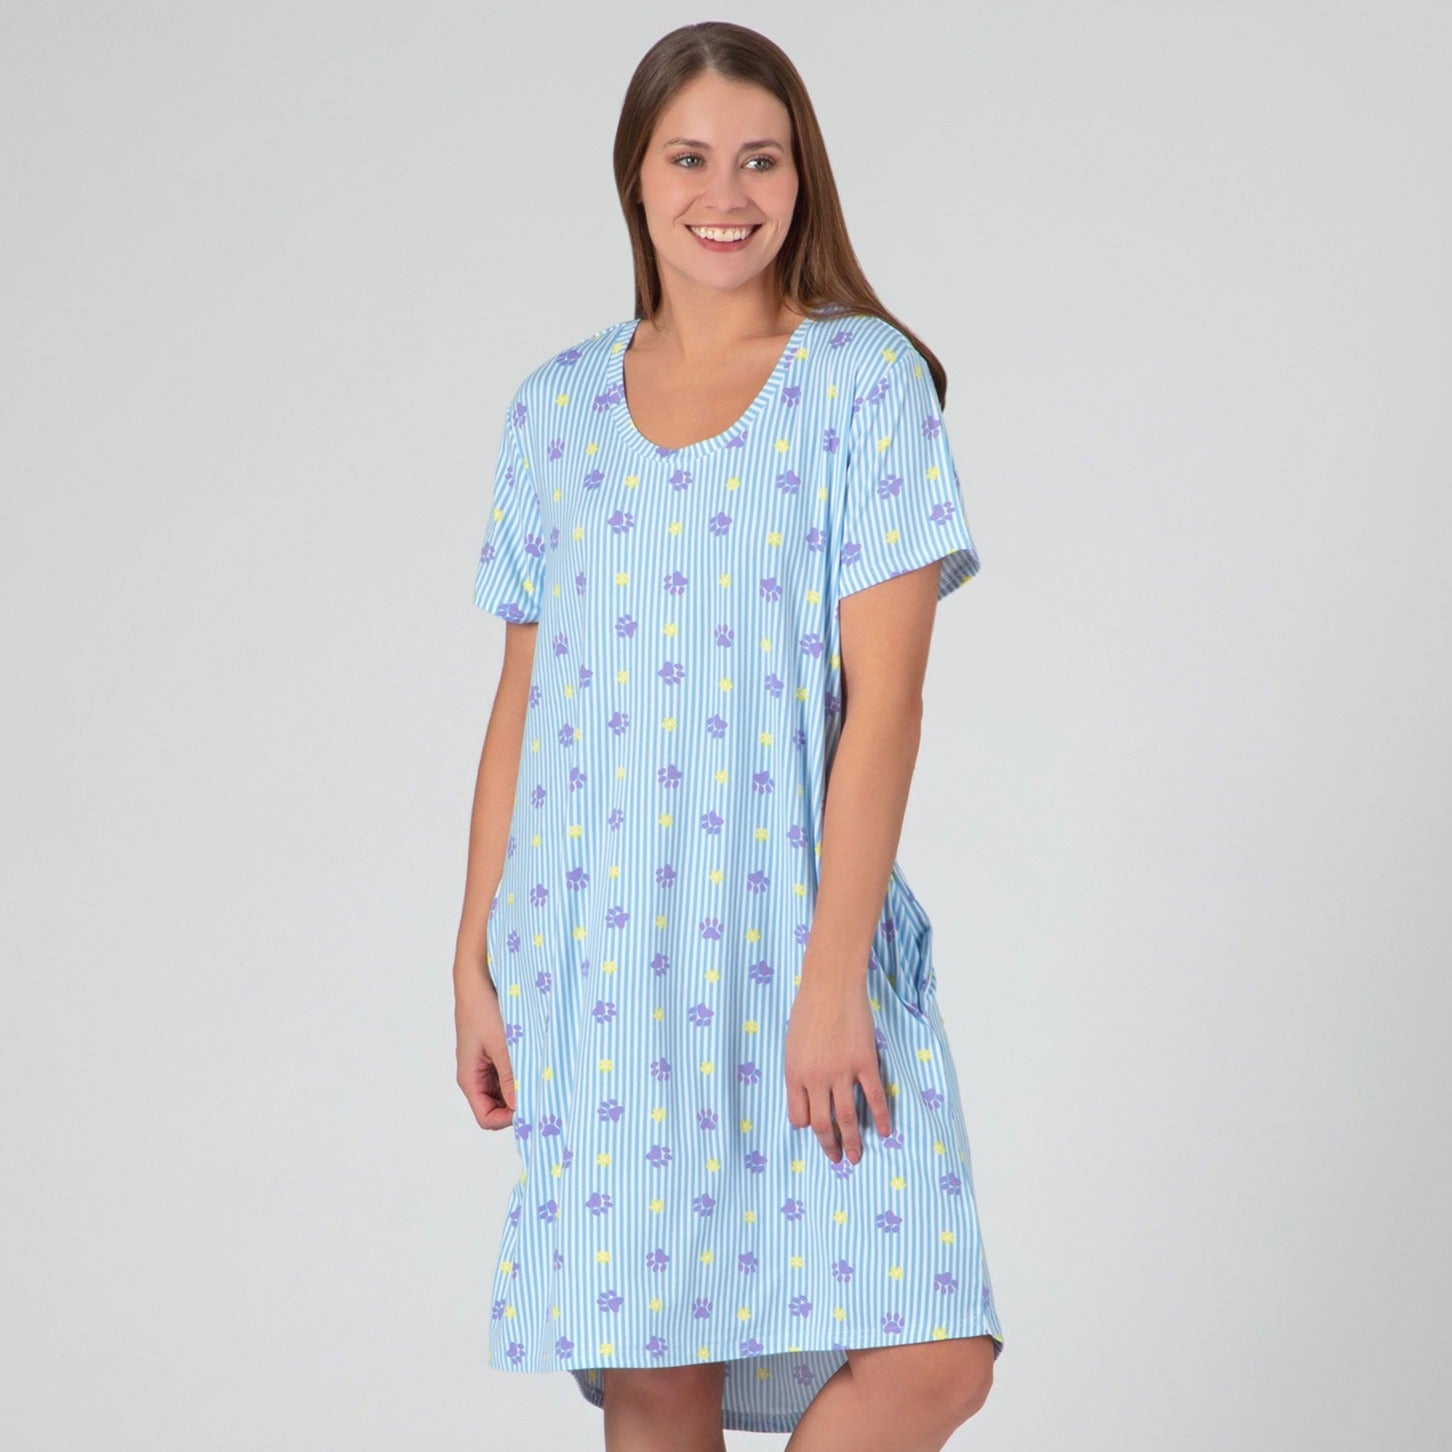 Paws & Pinstripes Soft Touch Pajamas - Pocket Nightgown - M